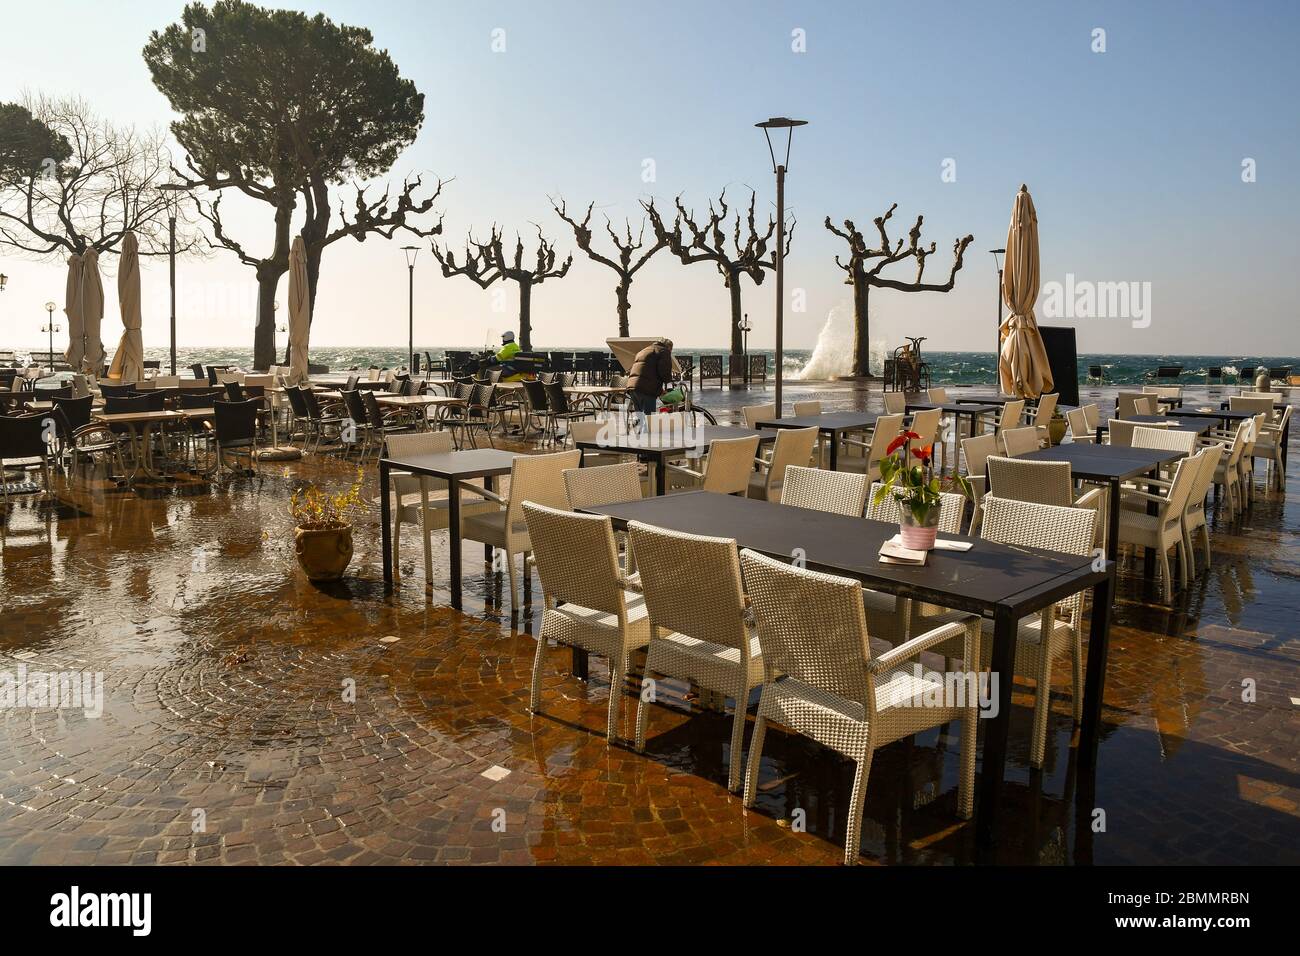 View of the lake shore with empty outdoor café in a windy day with high waves flooding the lakeside, Garda, Verona, Veneto, Italy Stock Photo